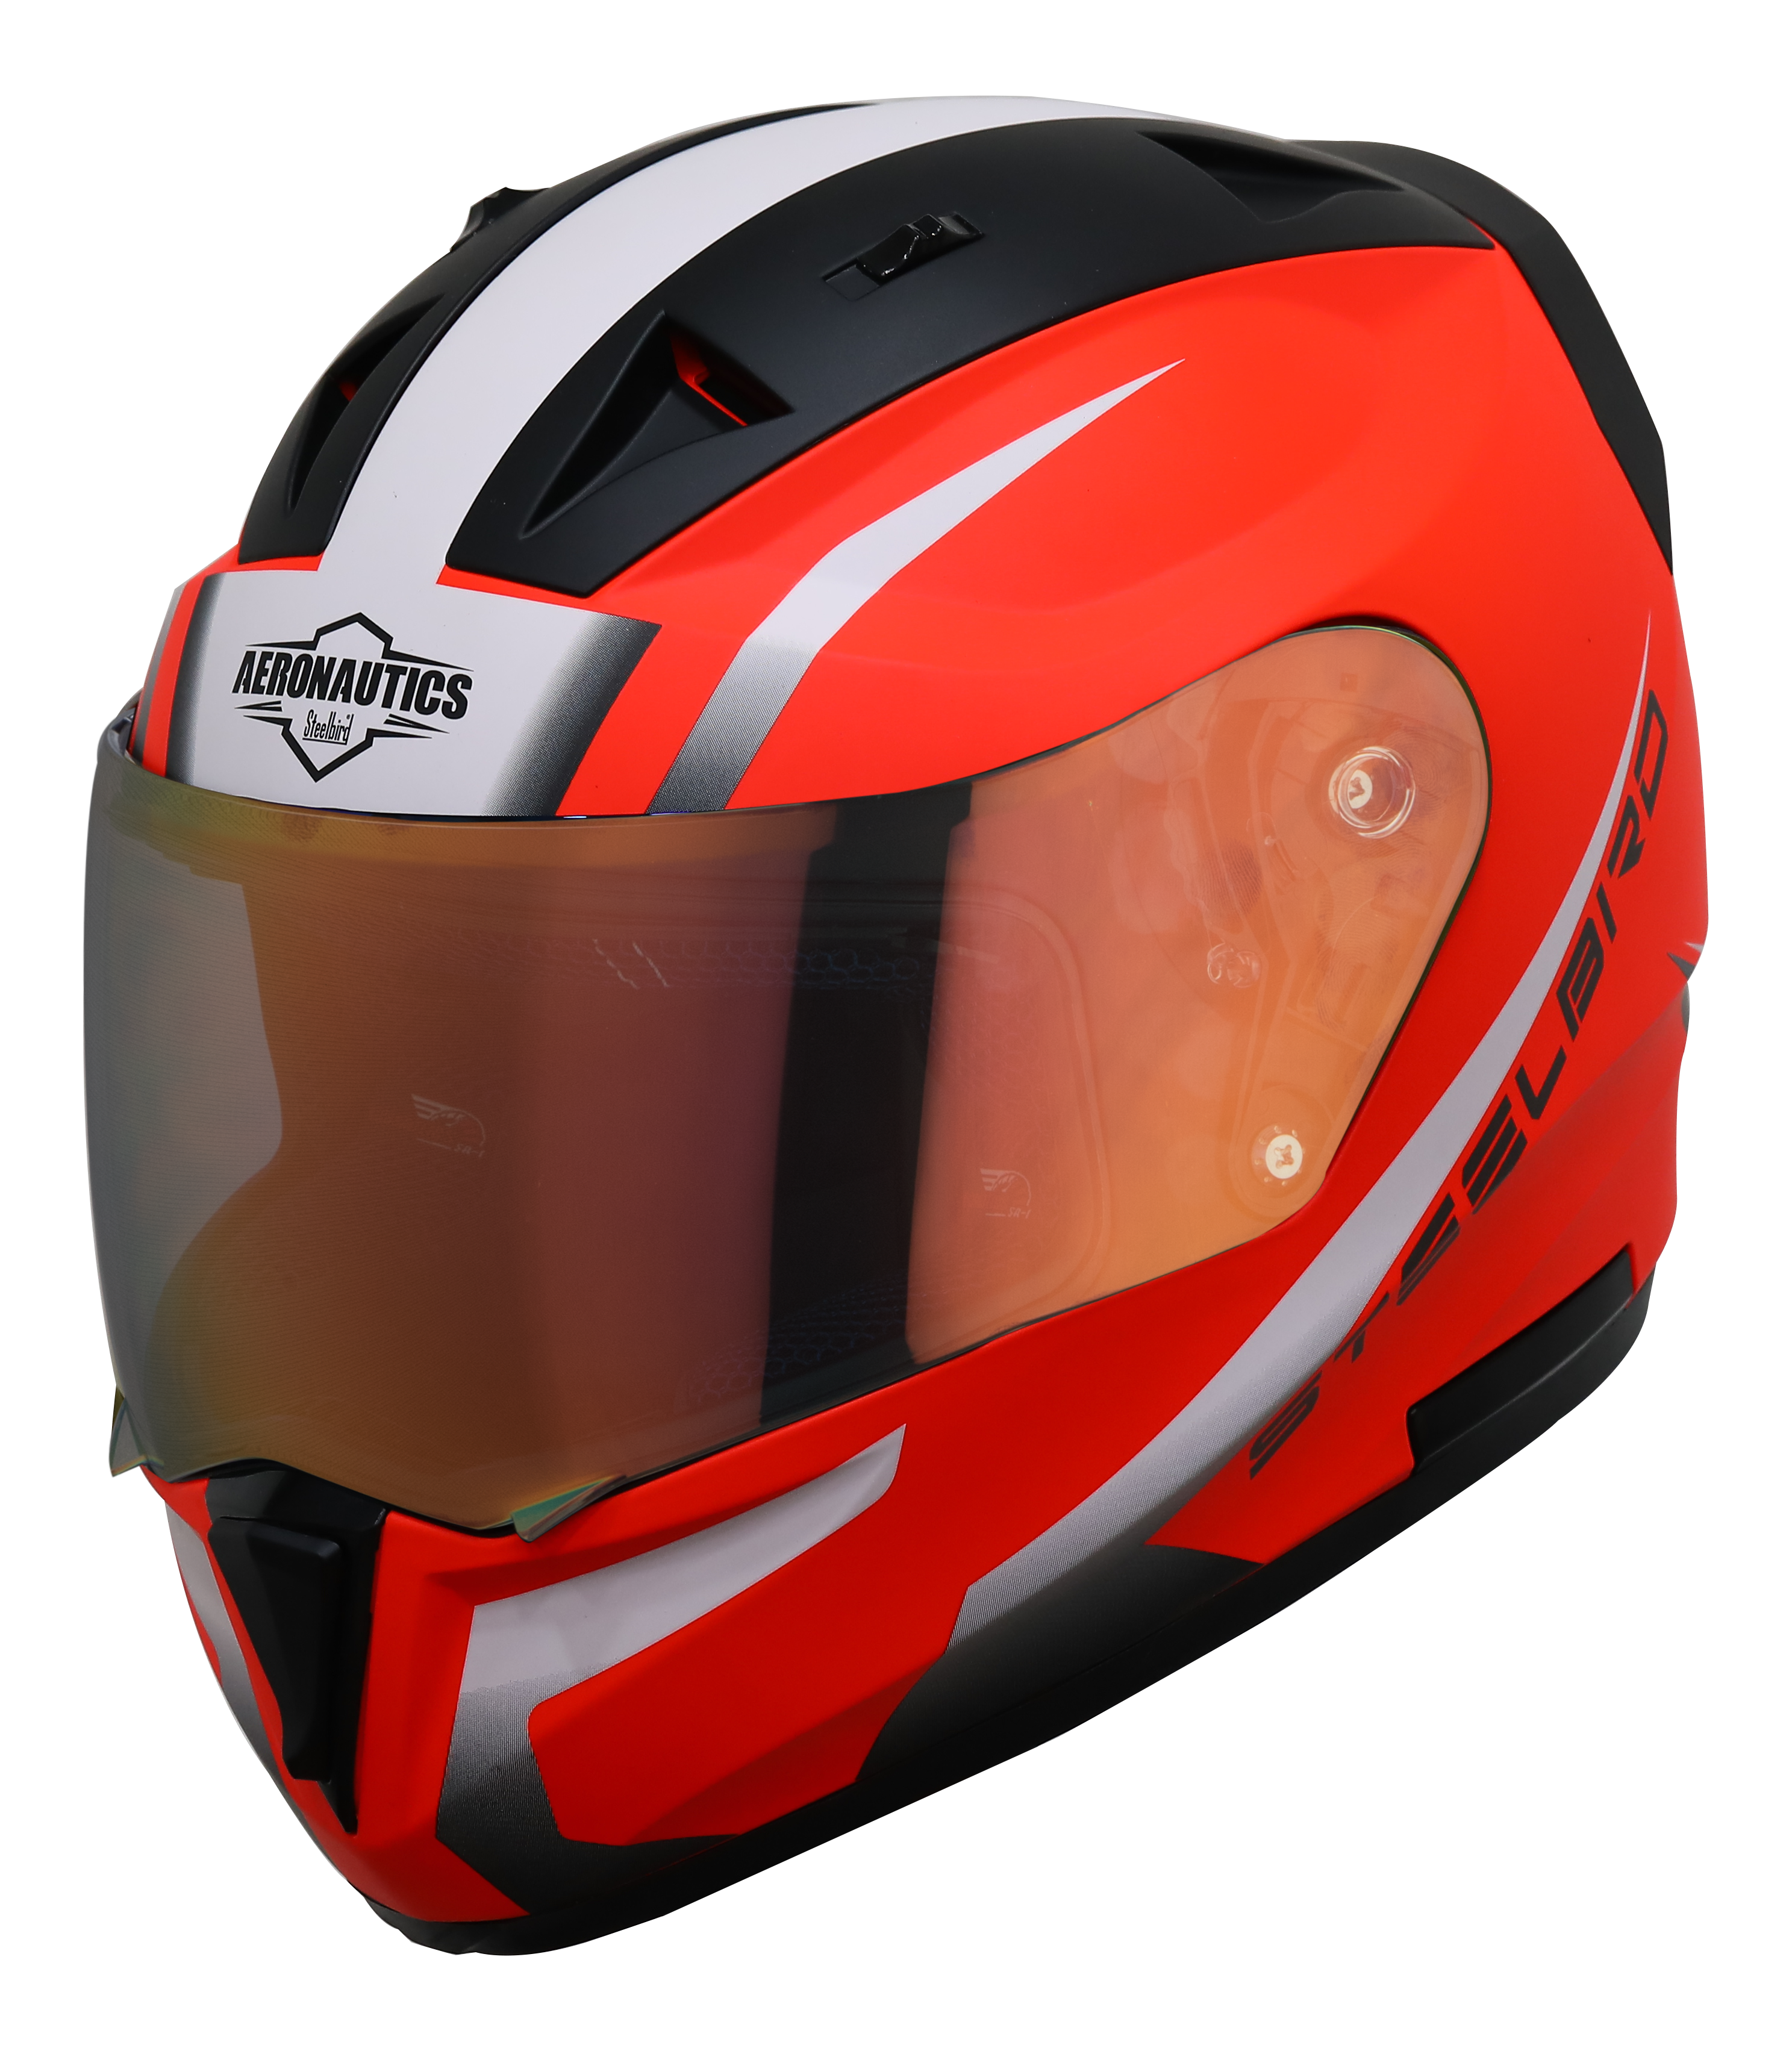 SA-1 WHIF GLOSSY FLUO RED WITH WHITE NIGHT VISION GOLD VISOR (WITH EXTRA FREE CLEAR VISOR)